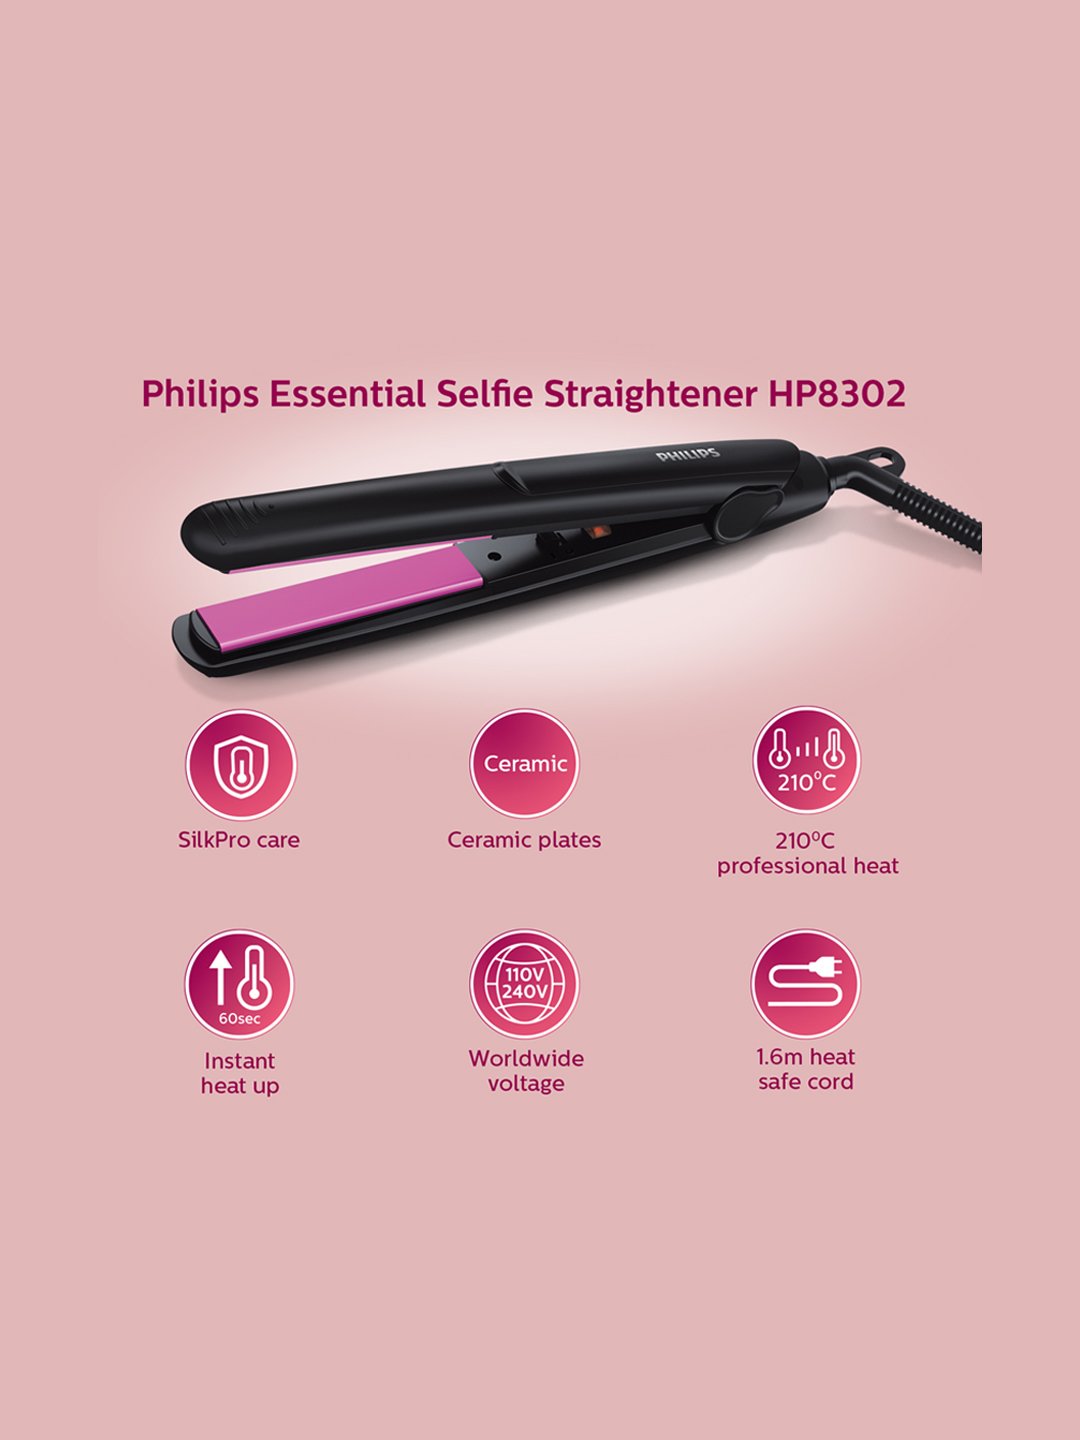 Share more than 125 philips hair products best